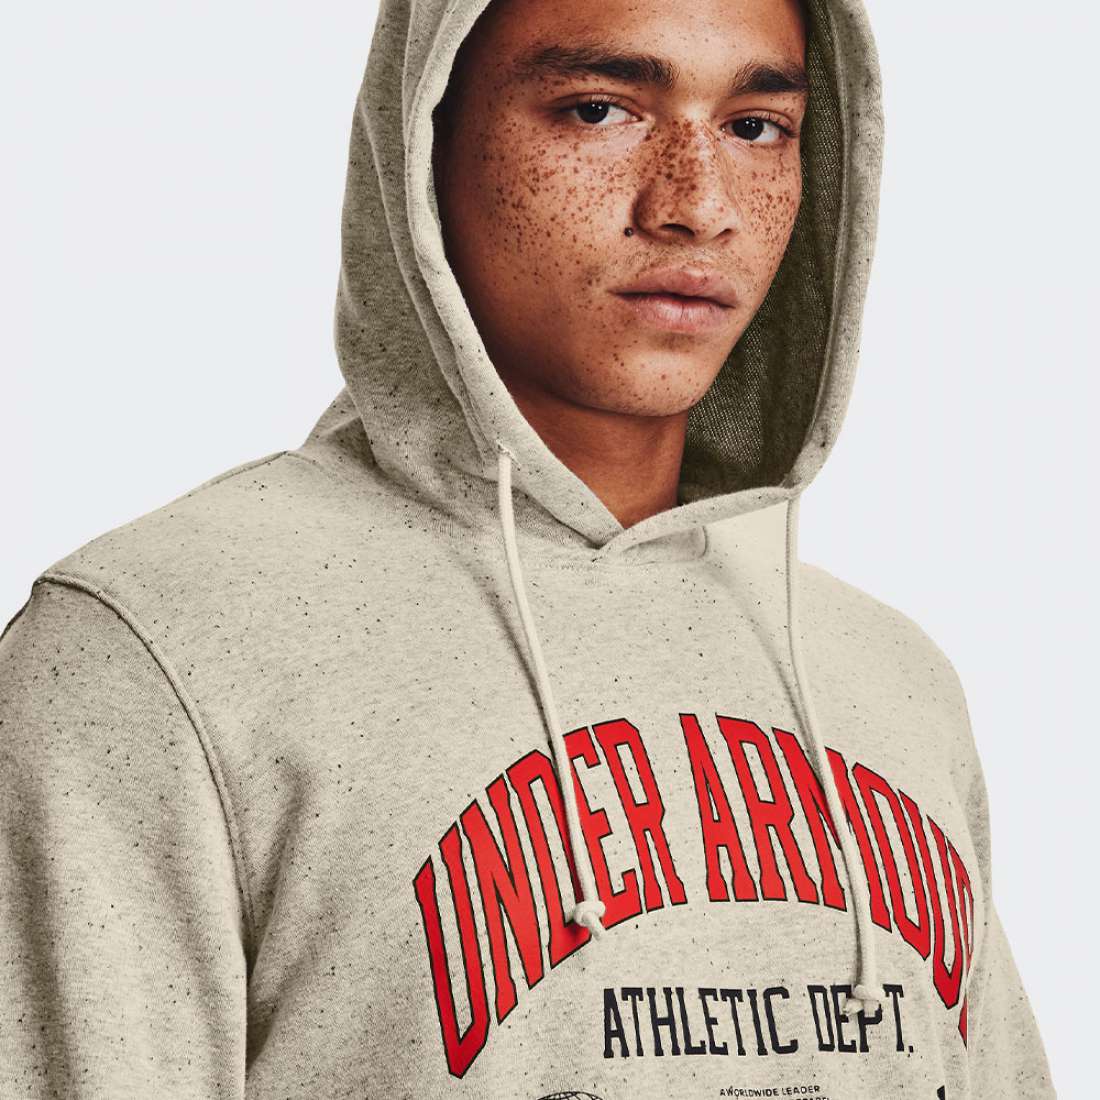 HOODIE UNDER ARMOUR UA RIVAL TRY ATHLC BRN